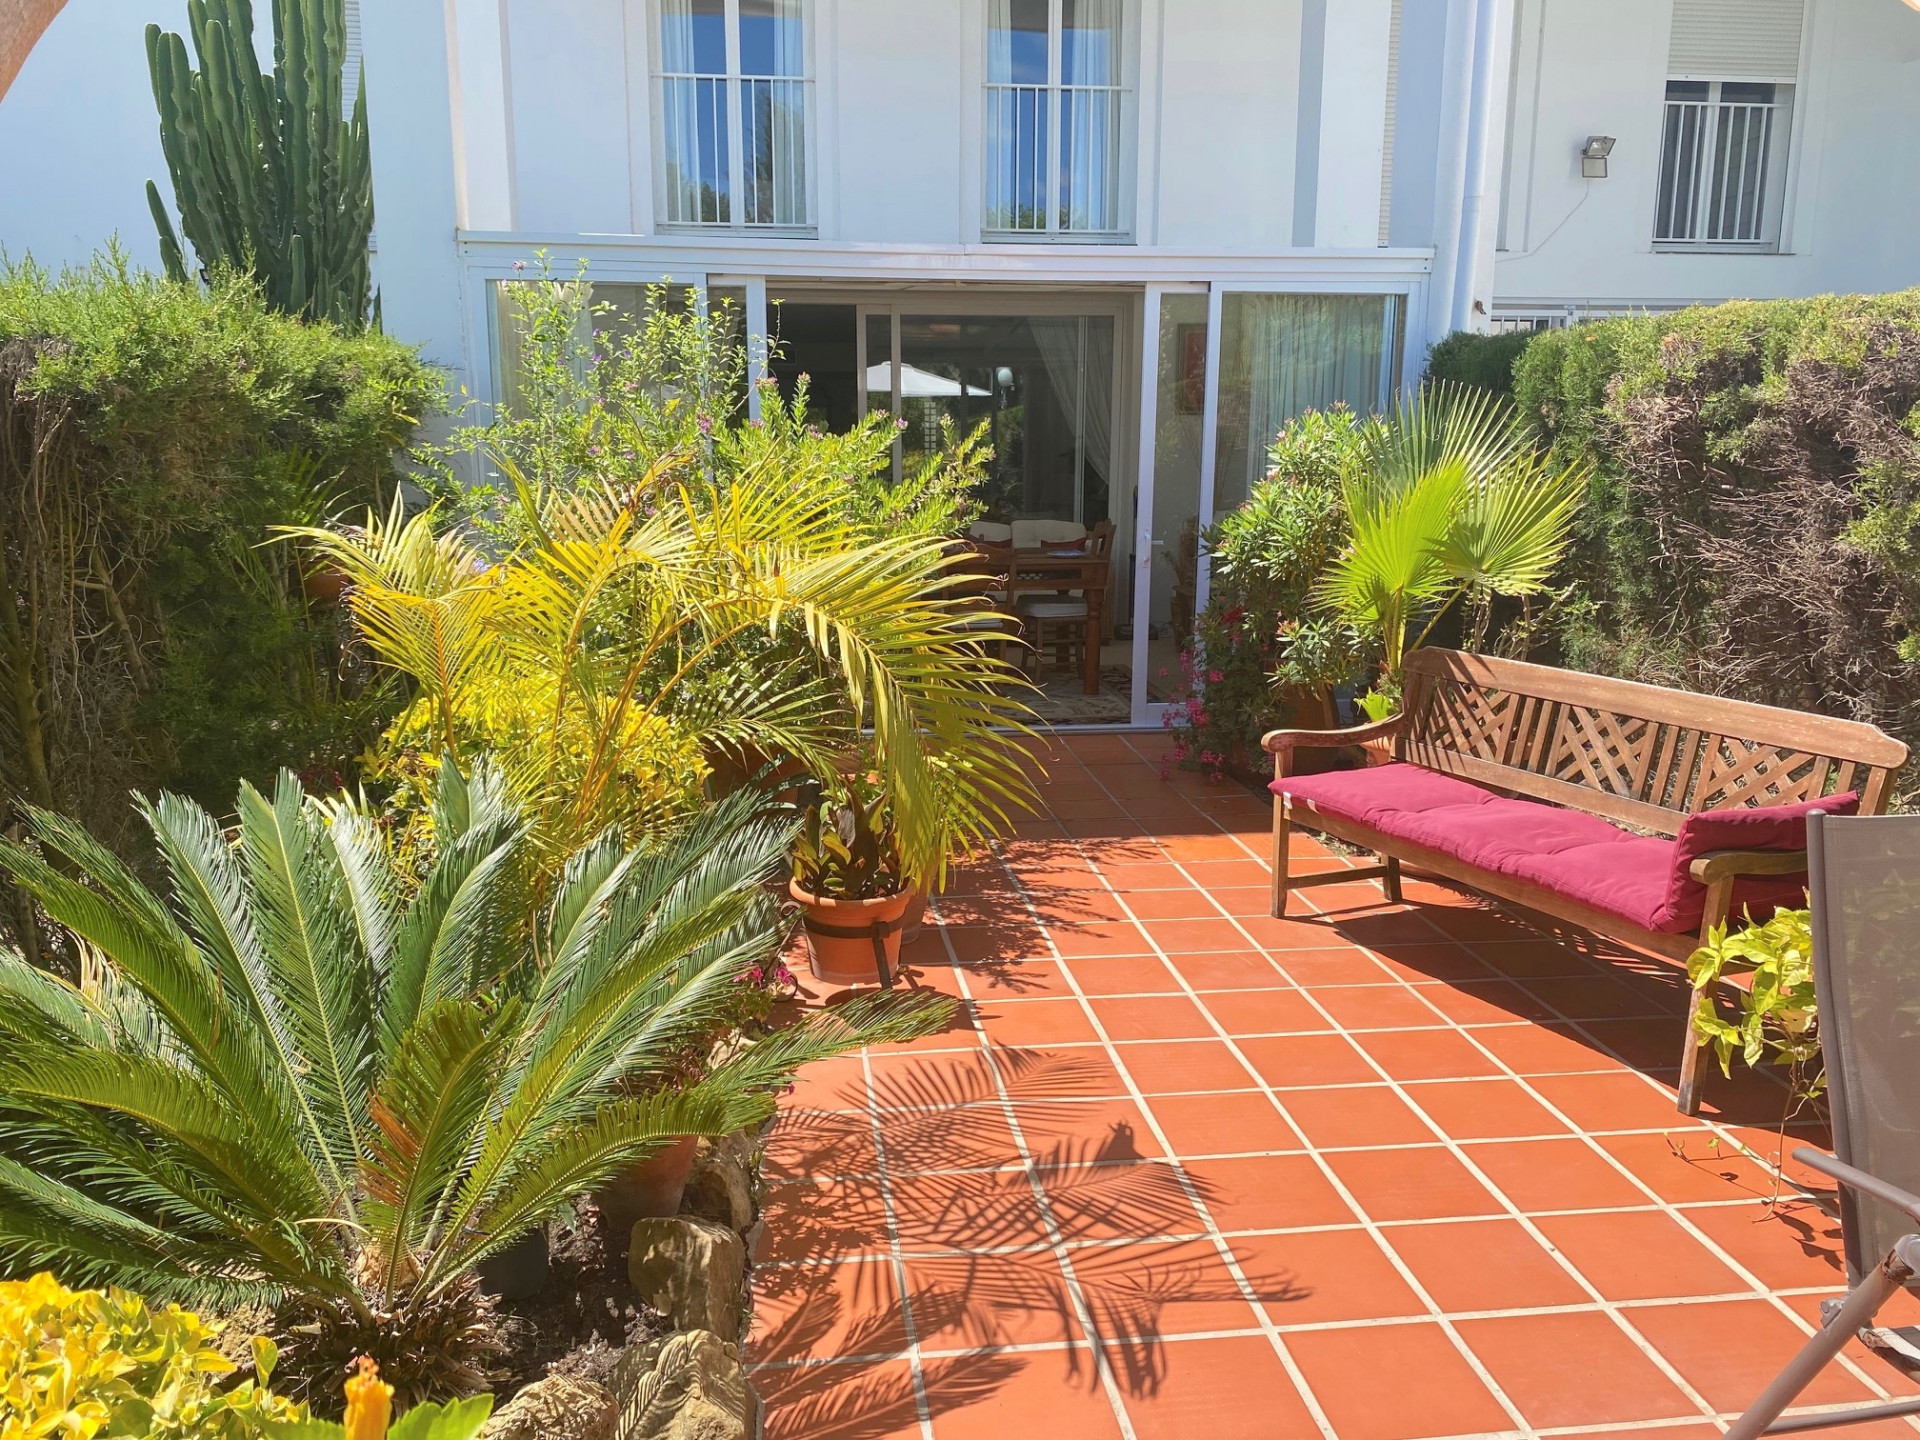 Nicely located duplex ground floor apartment in Bel Air, close to all amenities